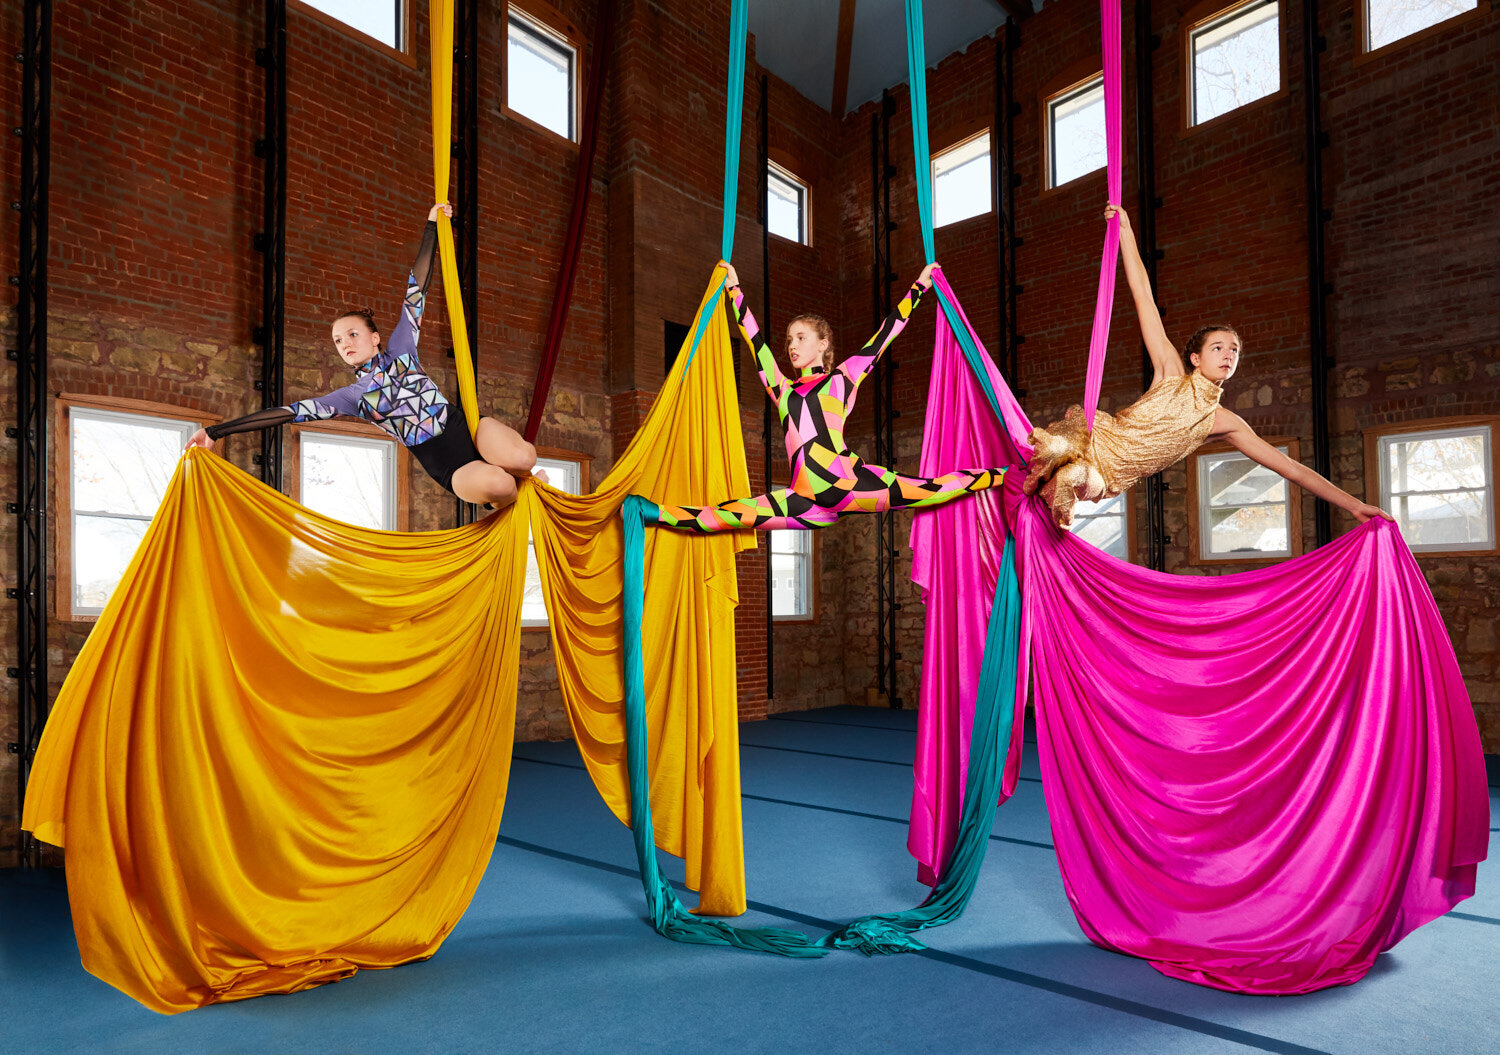 promotional photos for Bricolage Cirkus aerial performers on colorful silks